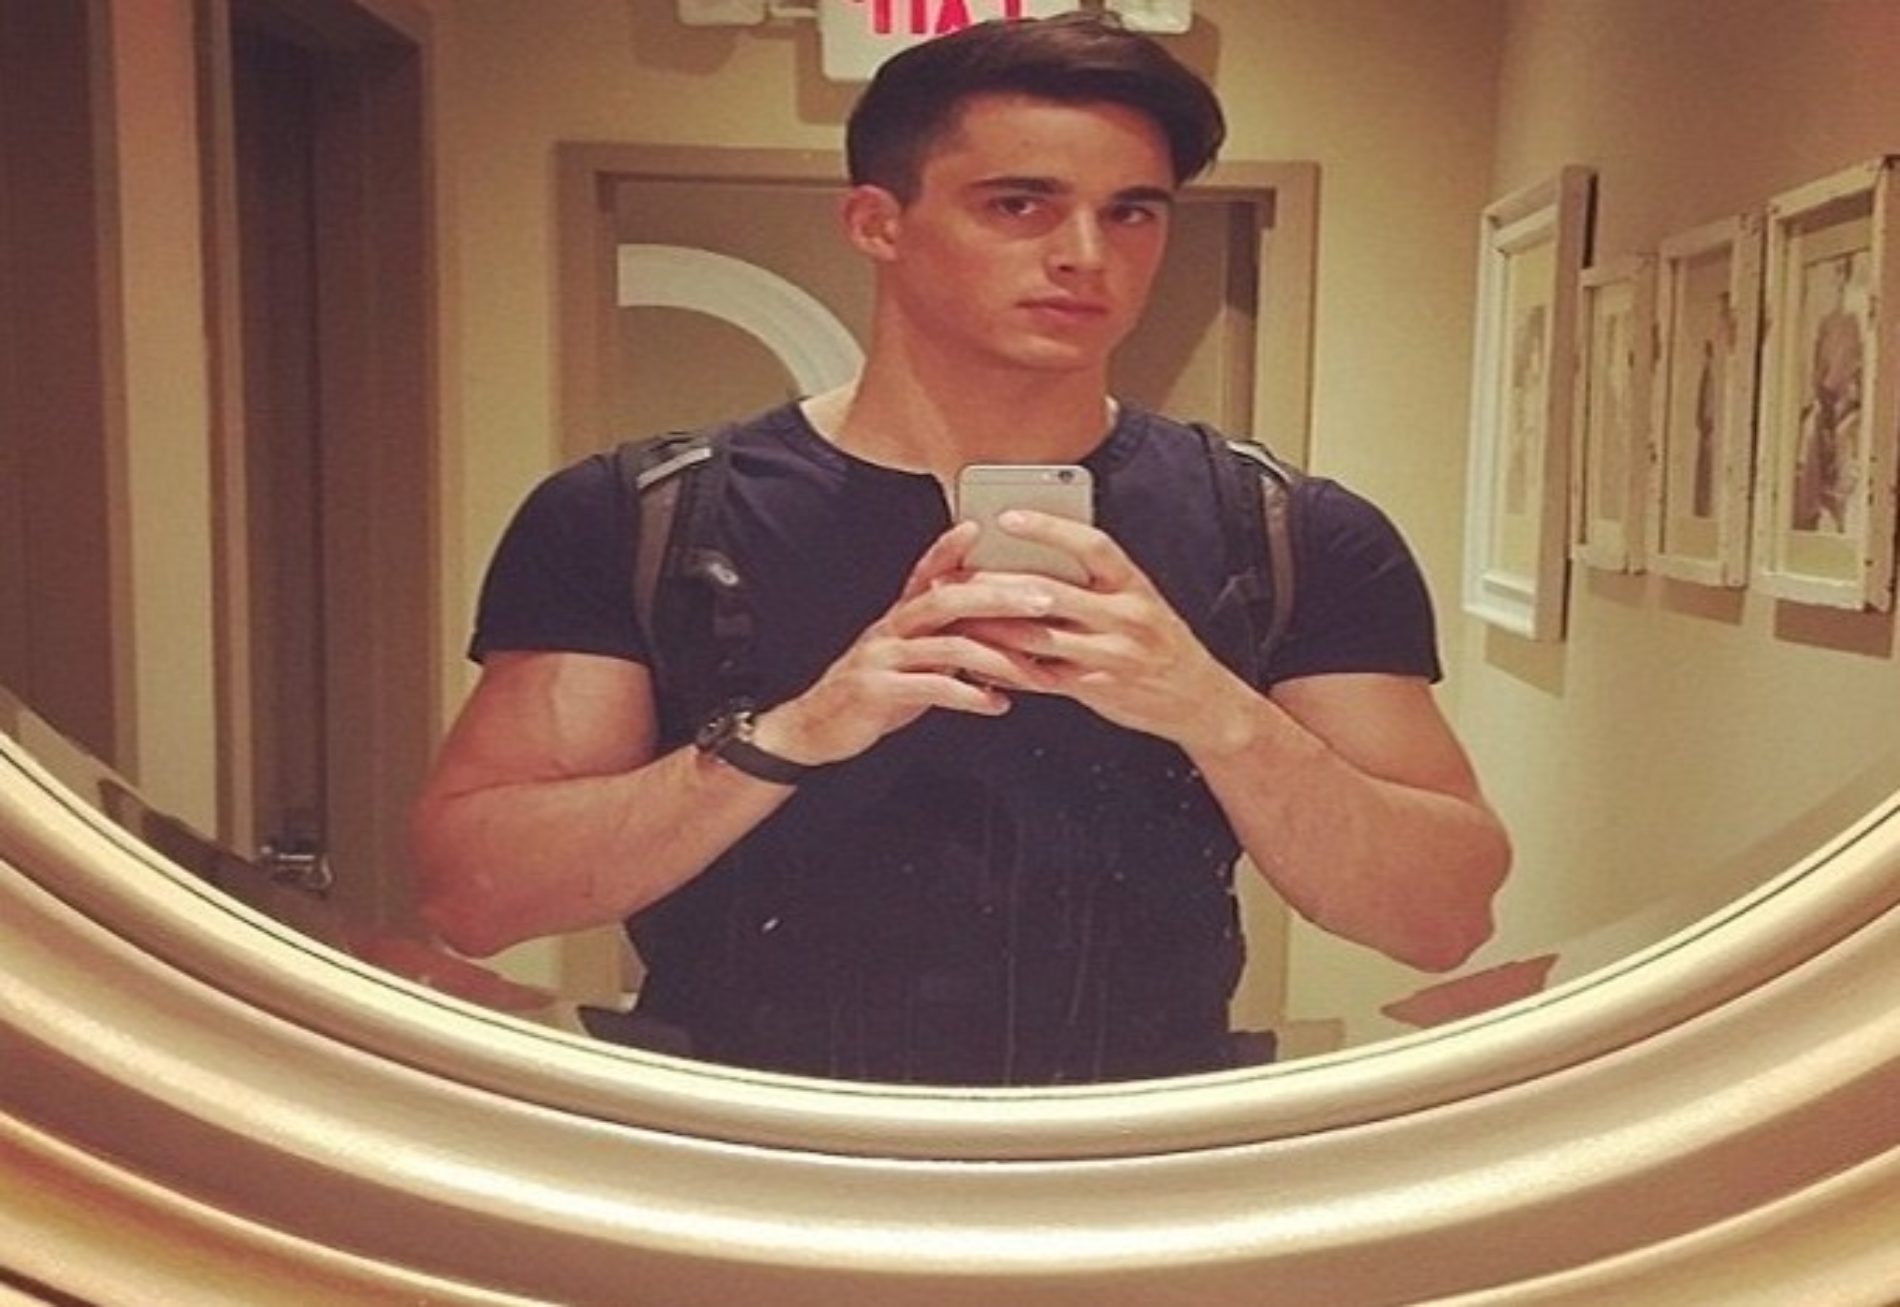 The World’s Hottest Teacher Complains He’s A Victim Of Male Objectification